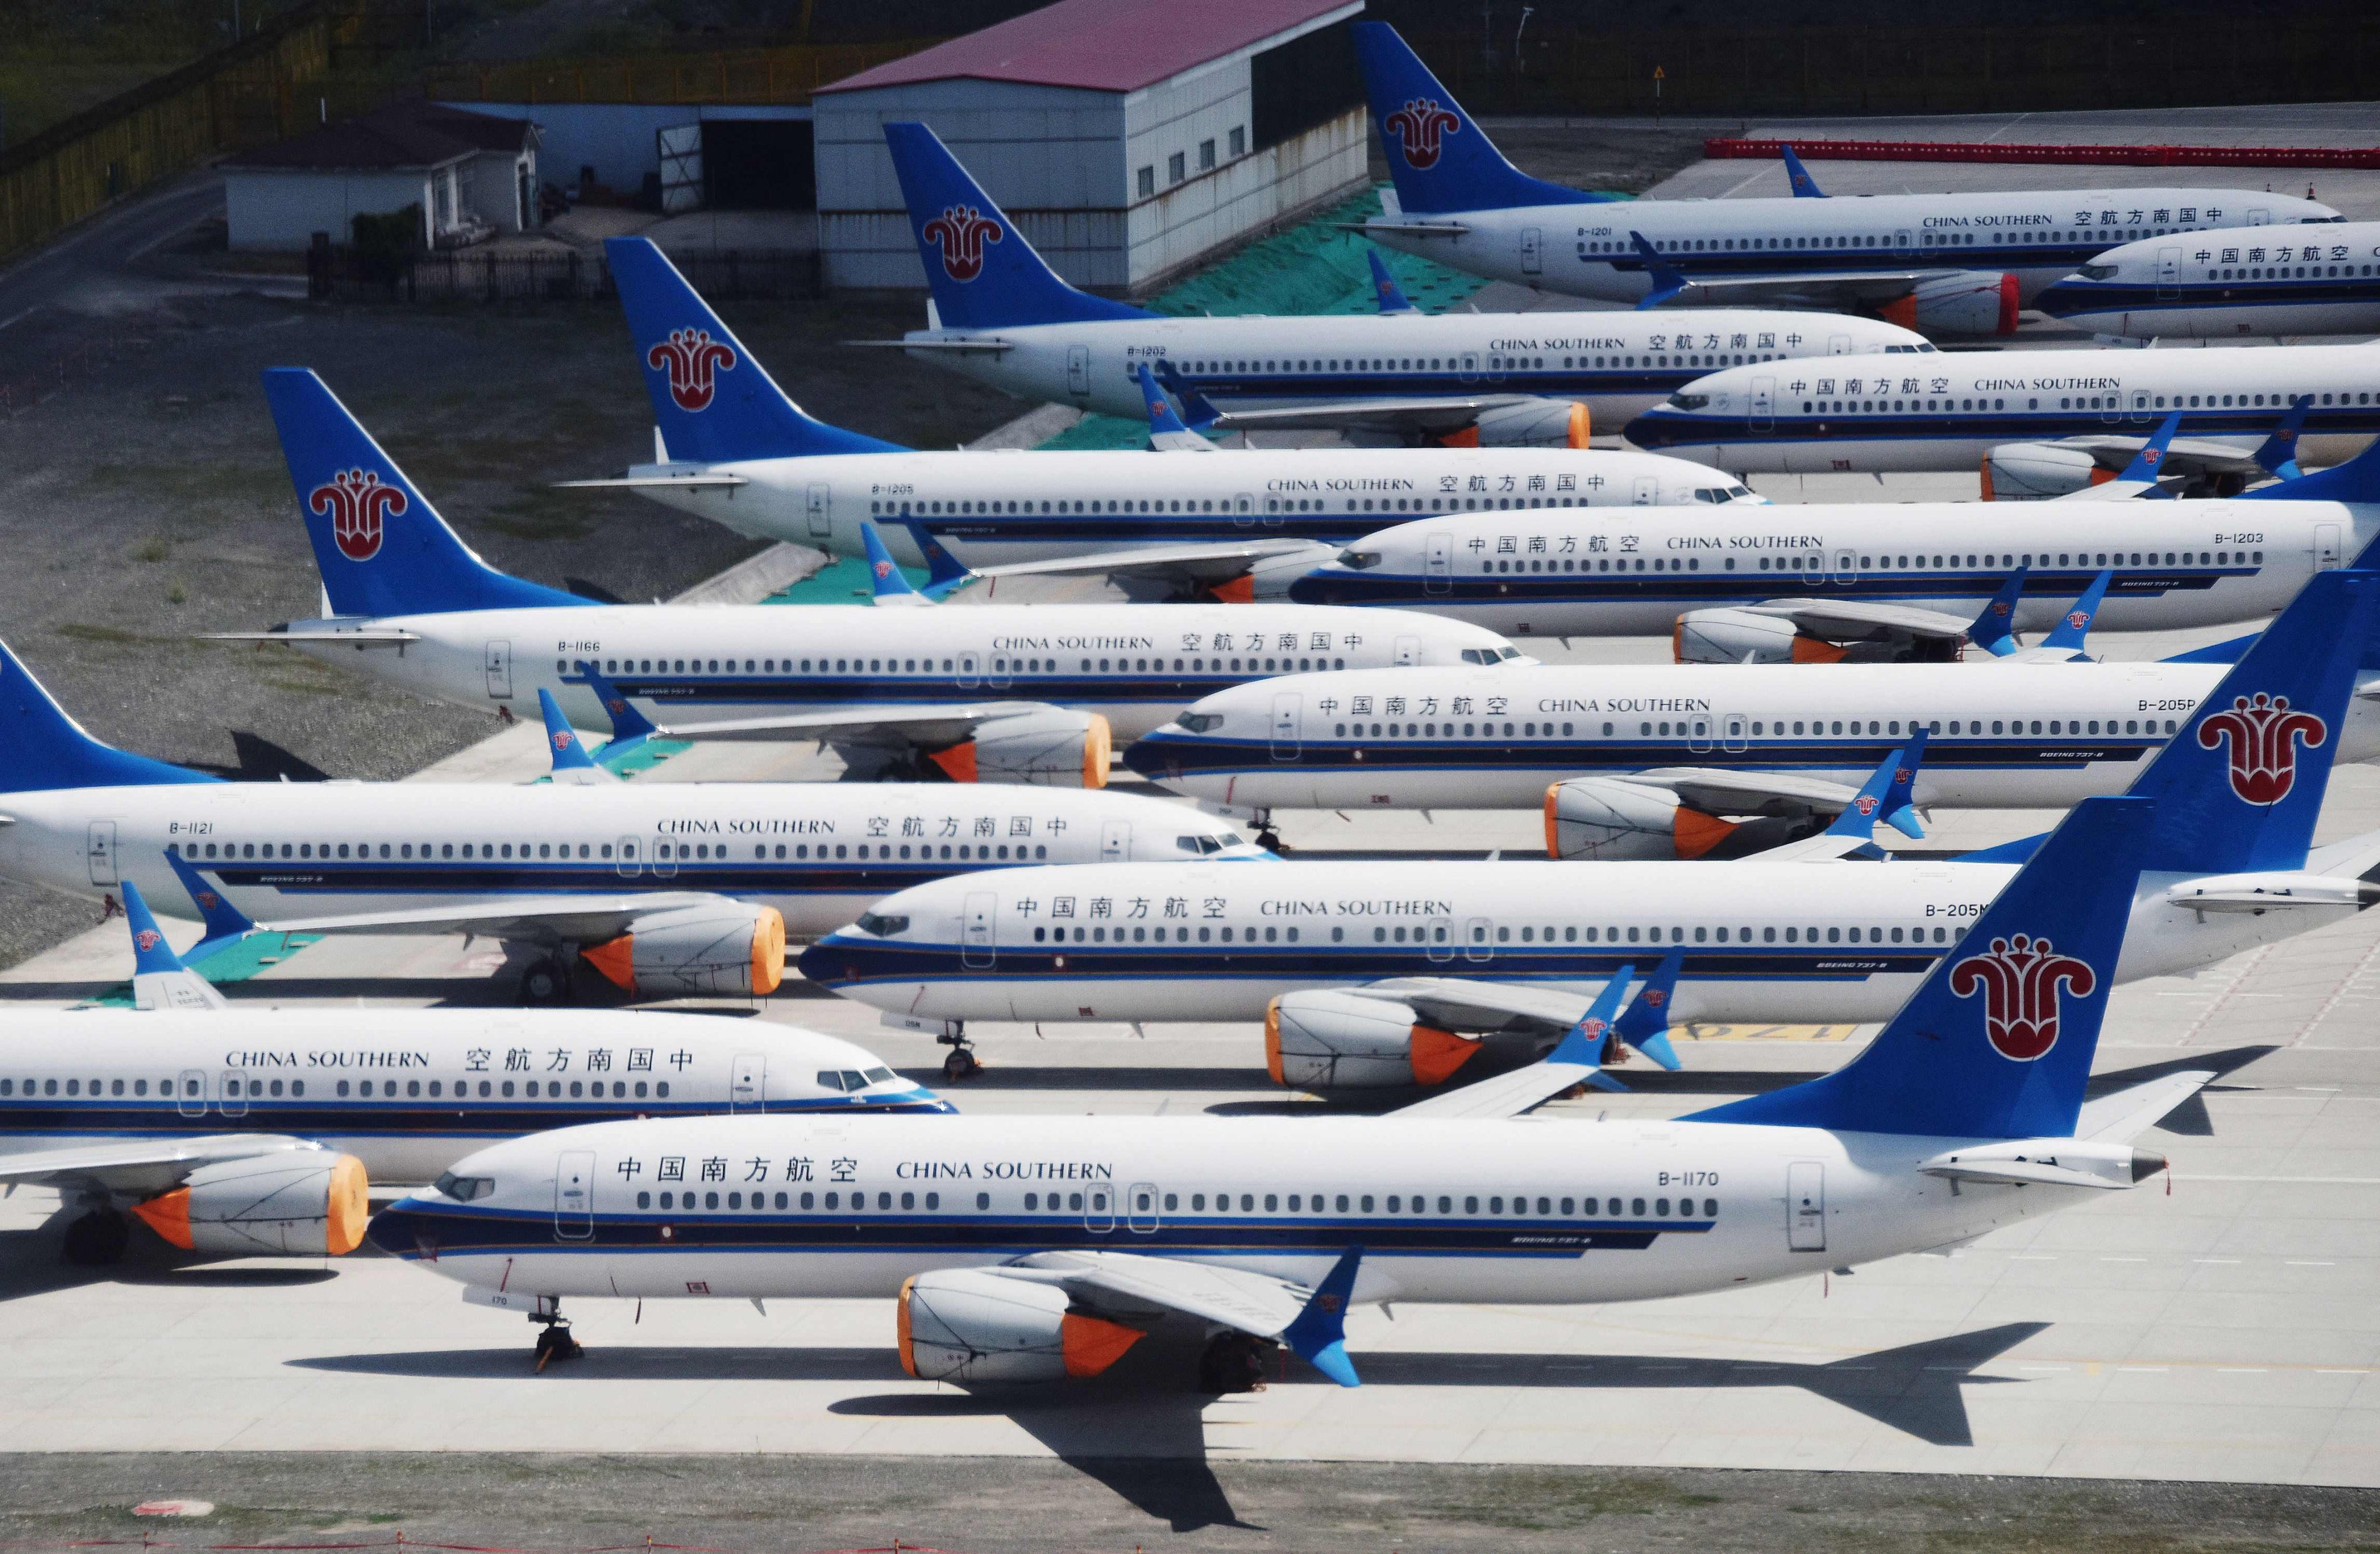 Last year, Boeing said it was disappointed that “geopolitical differences continued to constrain US aircraft exports” in response to China’s three biggest state-owned airlines buying 300 jets from Airbus. Photo: AFP